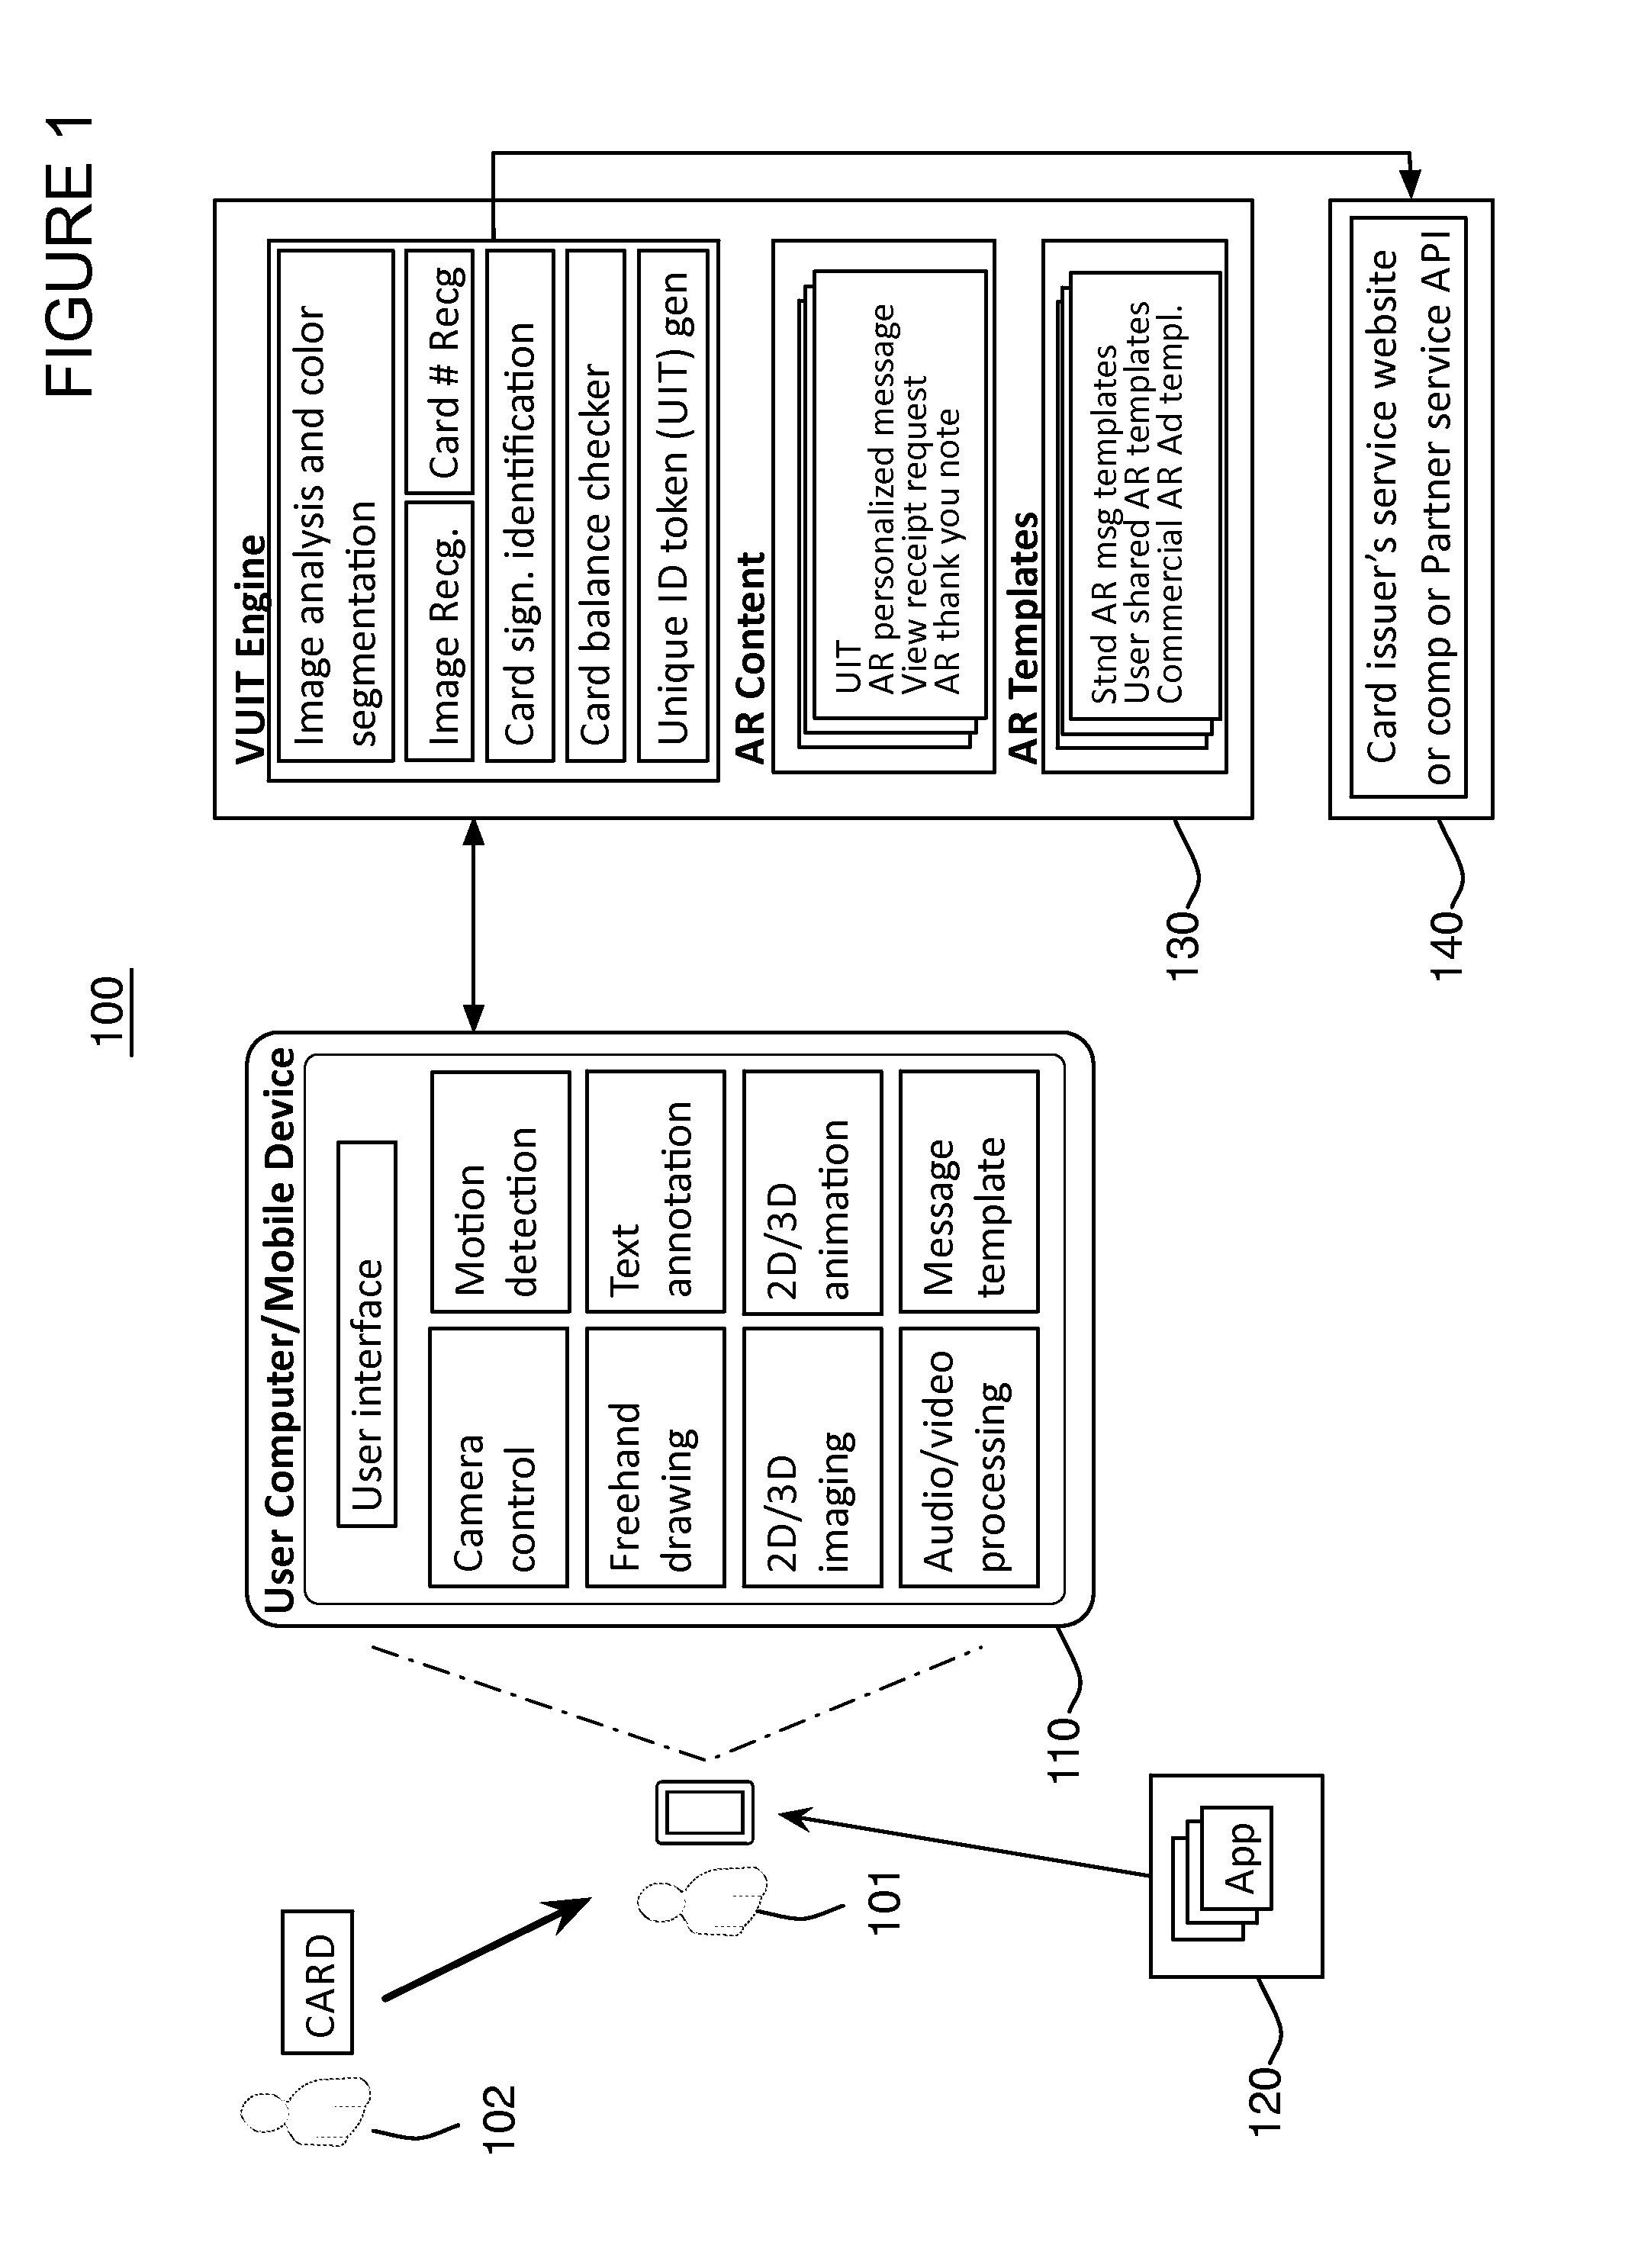 Augmented reality messaging system and method based on multi-factor recognition